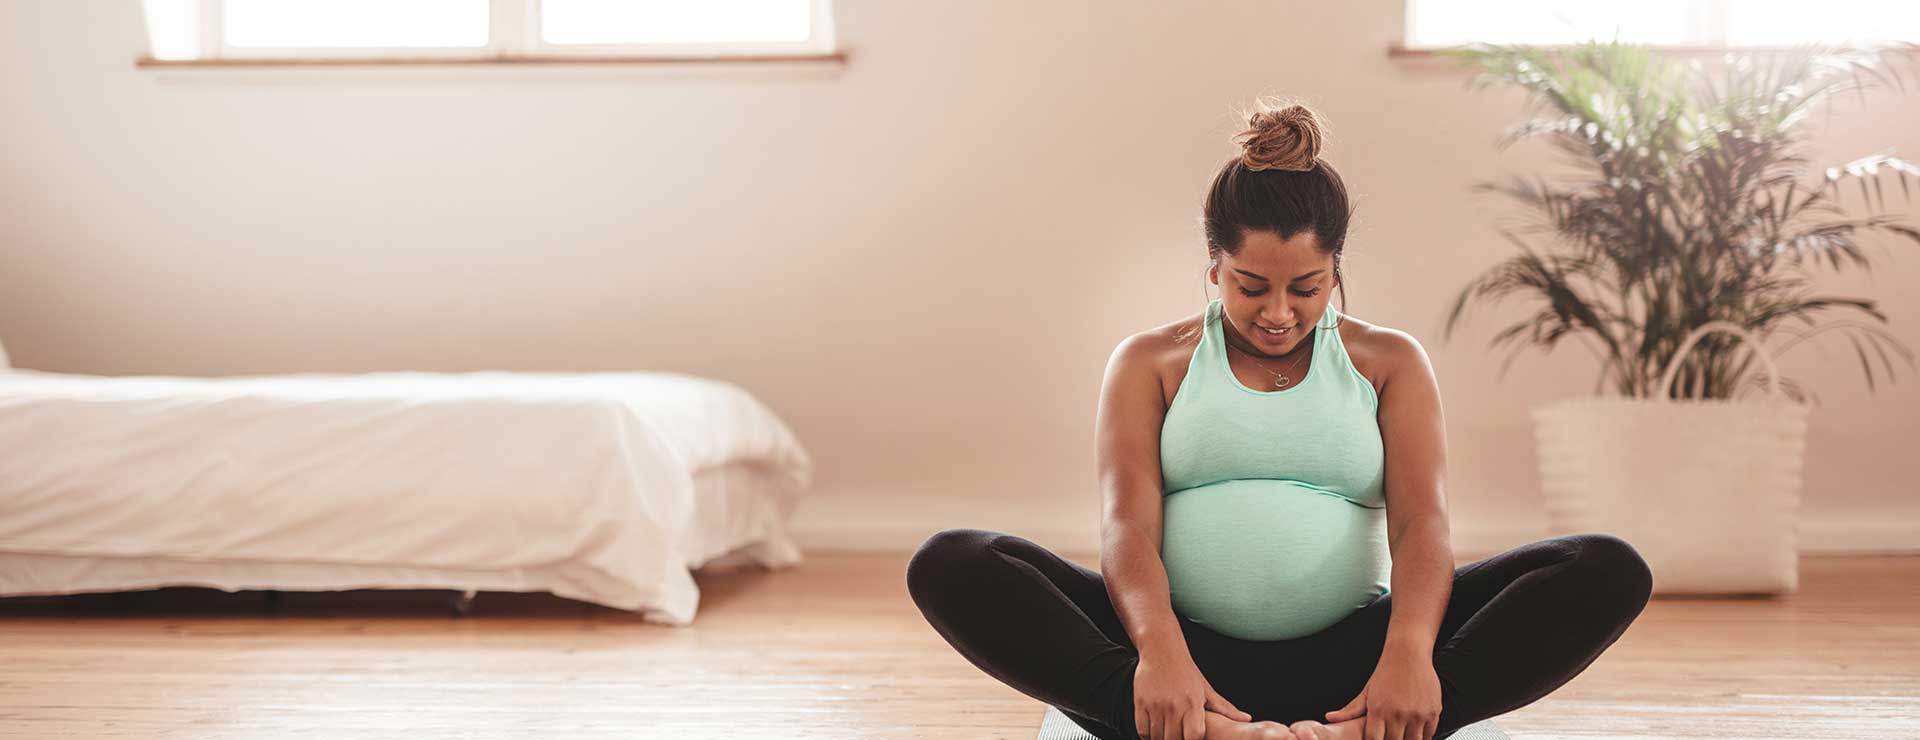 10 Gentle Pregnancy Stretches for a Healthy First Trimester